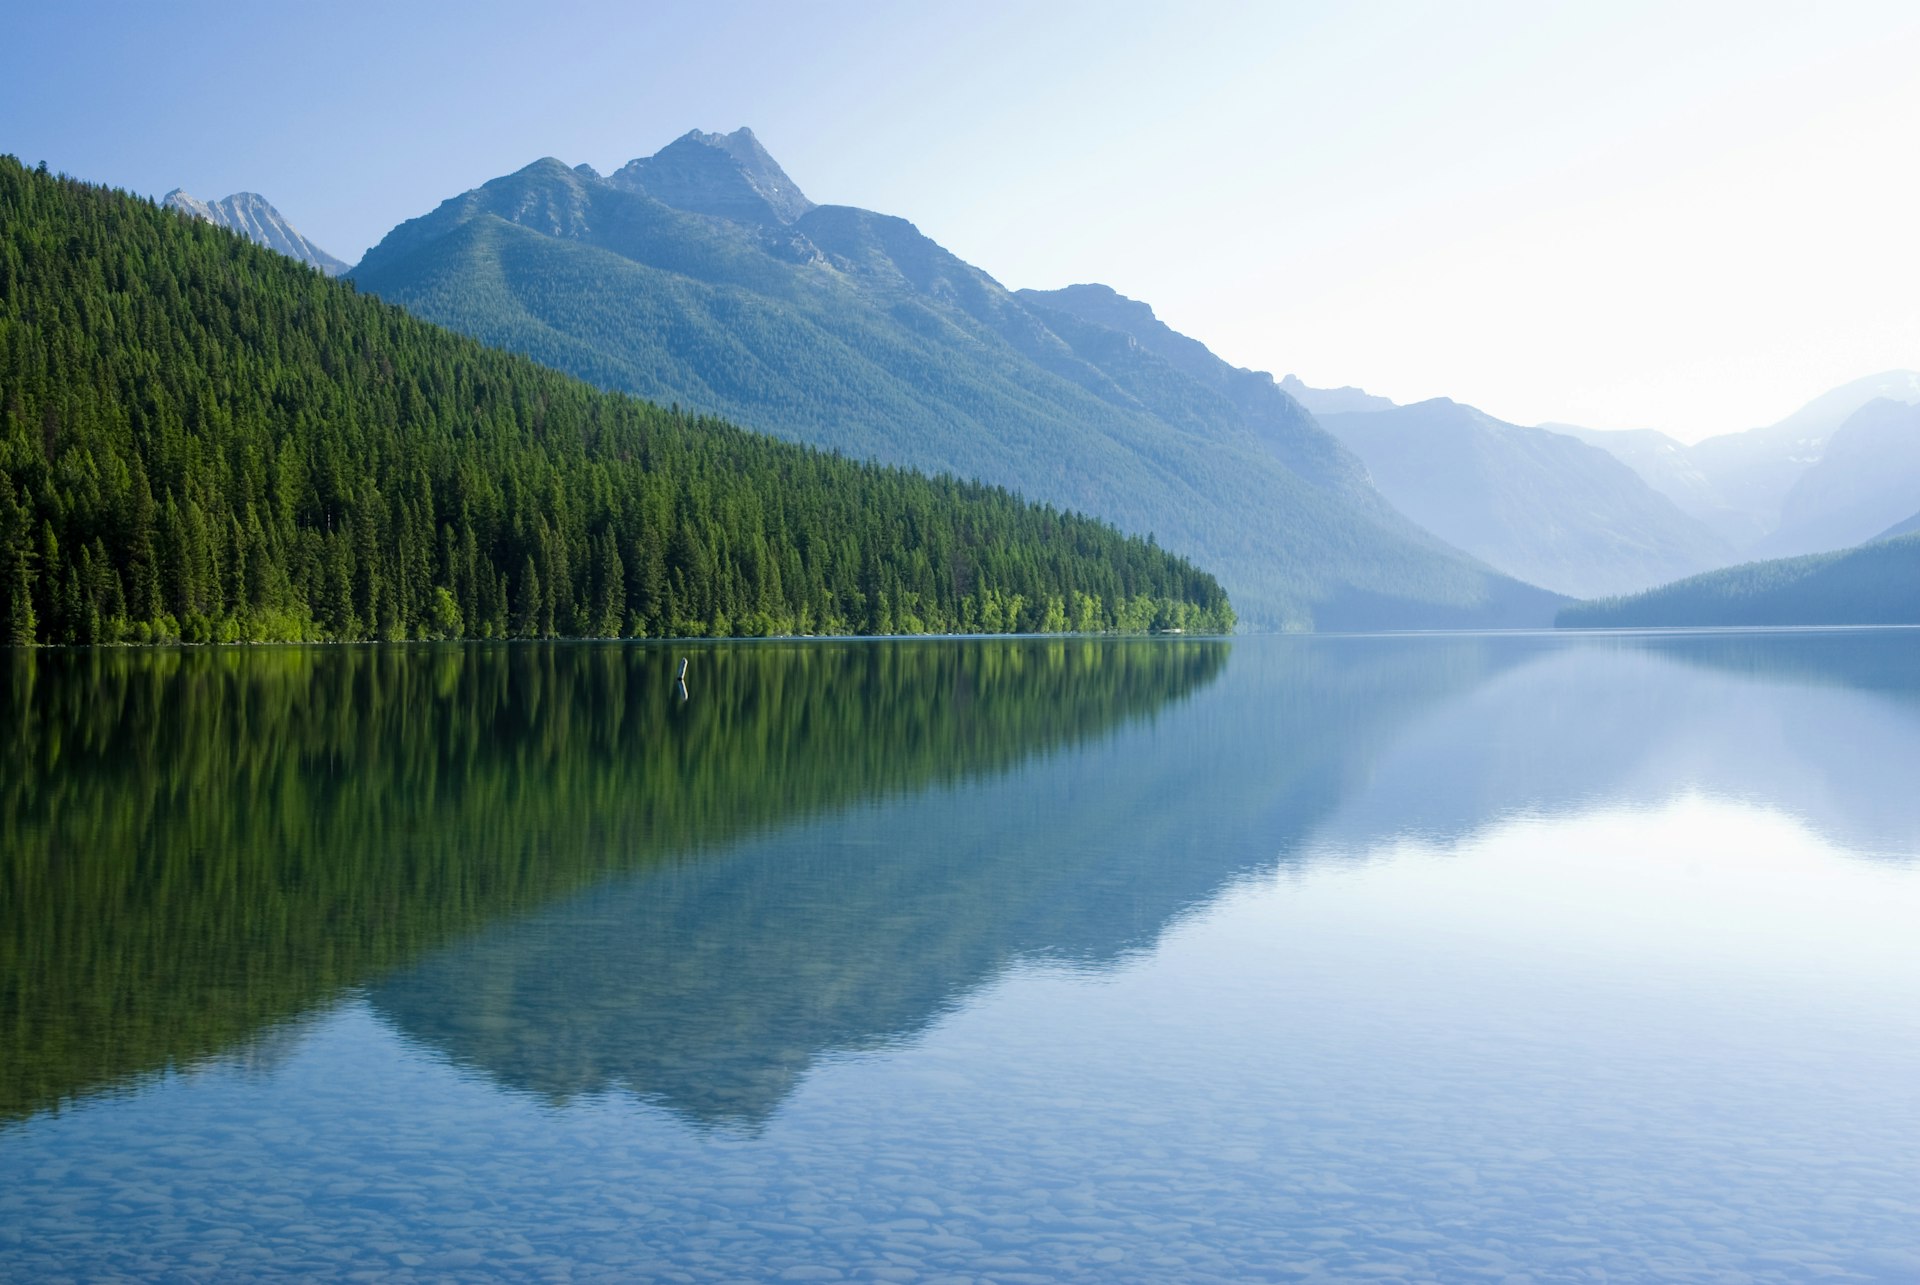 Mountains reflected in a very still, clear Bowman Lake in Glacier National Park